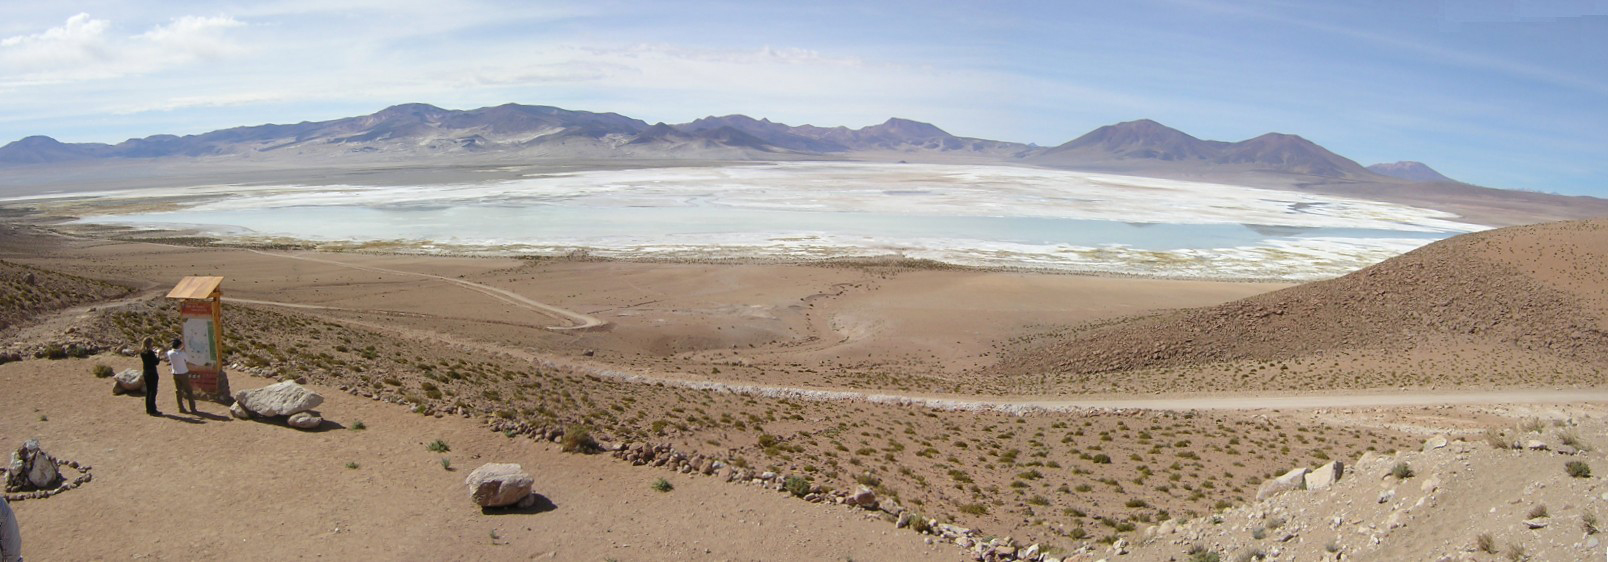 Panoramic view of the Salar de Huasco. In the center of the salt flats the ephemeral shallow waters, in the background the eroded volcanoes of the Mio-Pliocene, and in the foreground the viewpoint of the salt flats seated on the Huasco Ignimbrite (Miocene). The salts cover a surface area of about 50 km<sup>2</sup>.